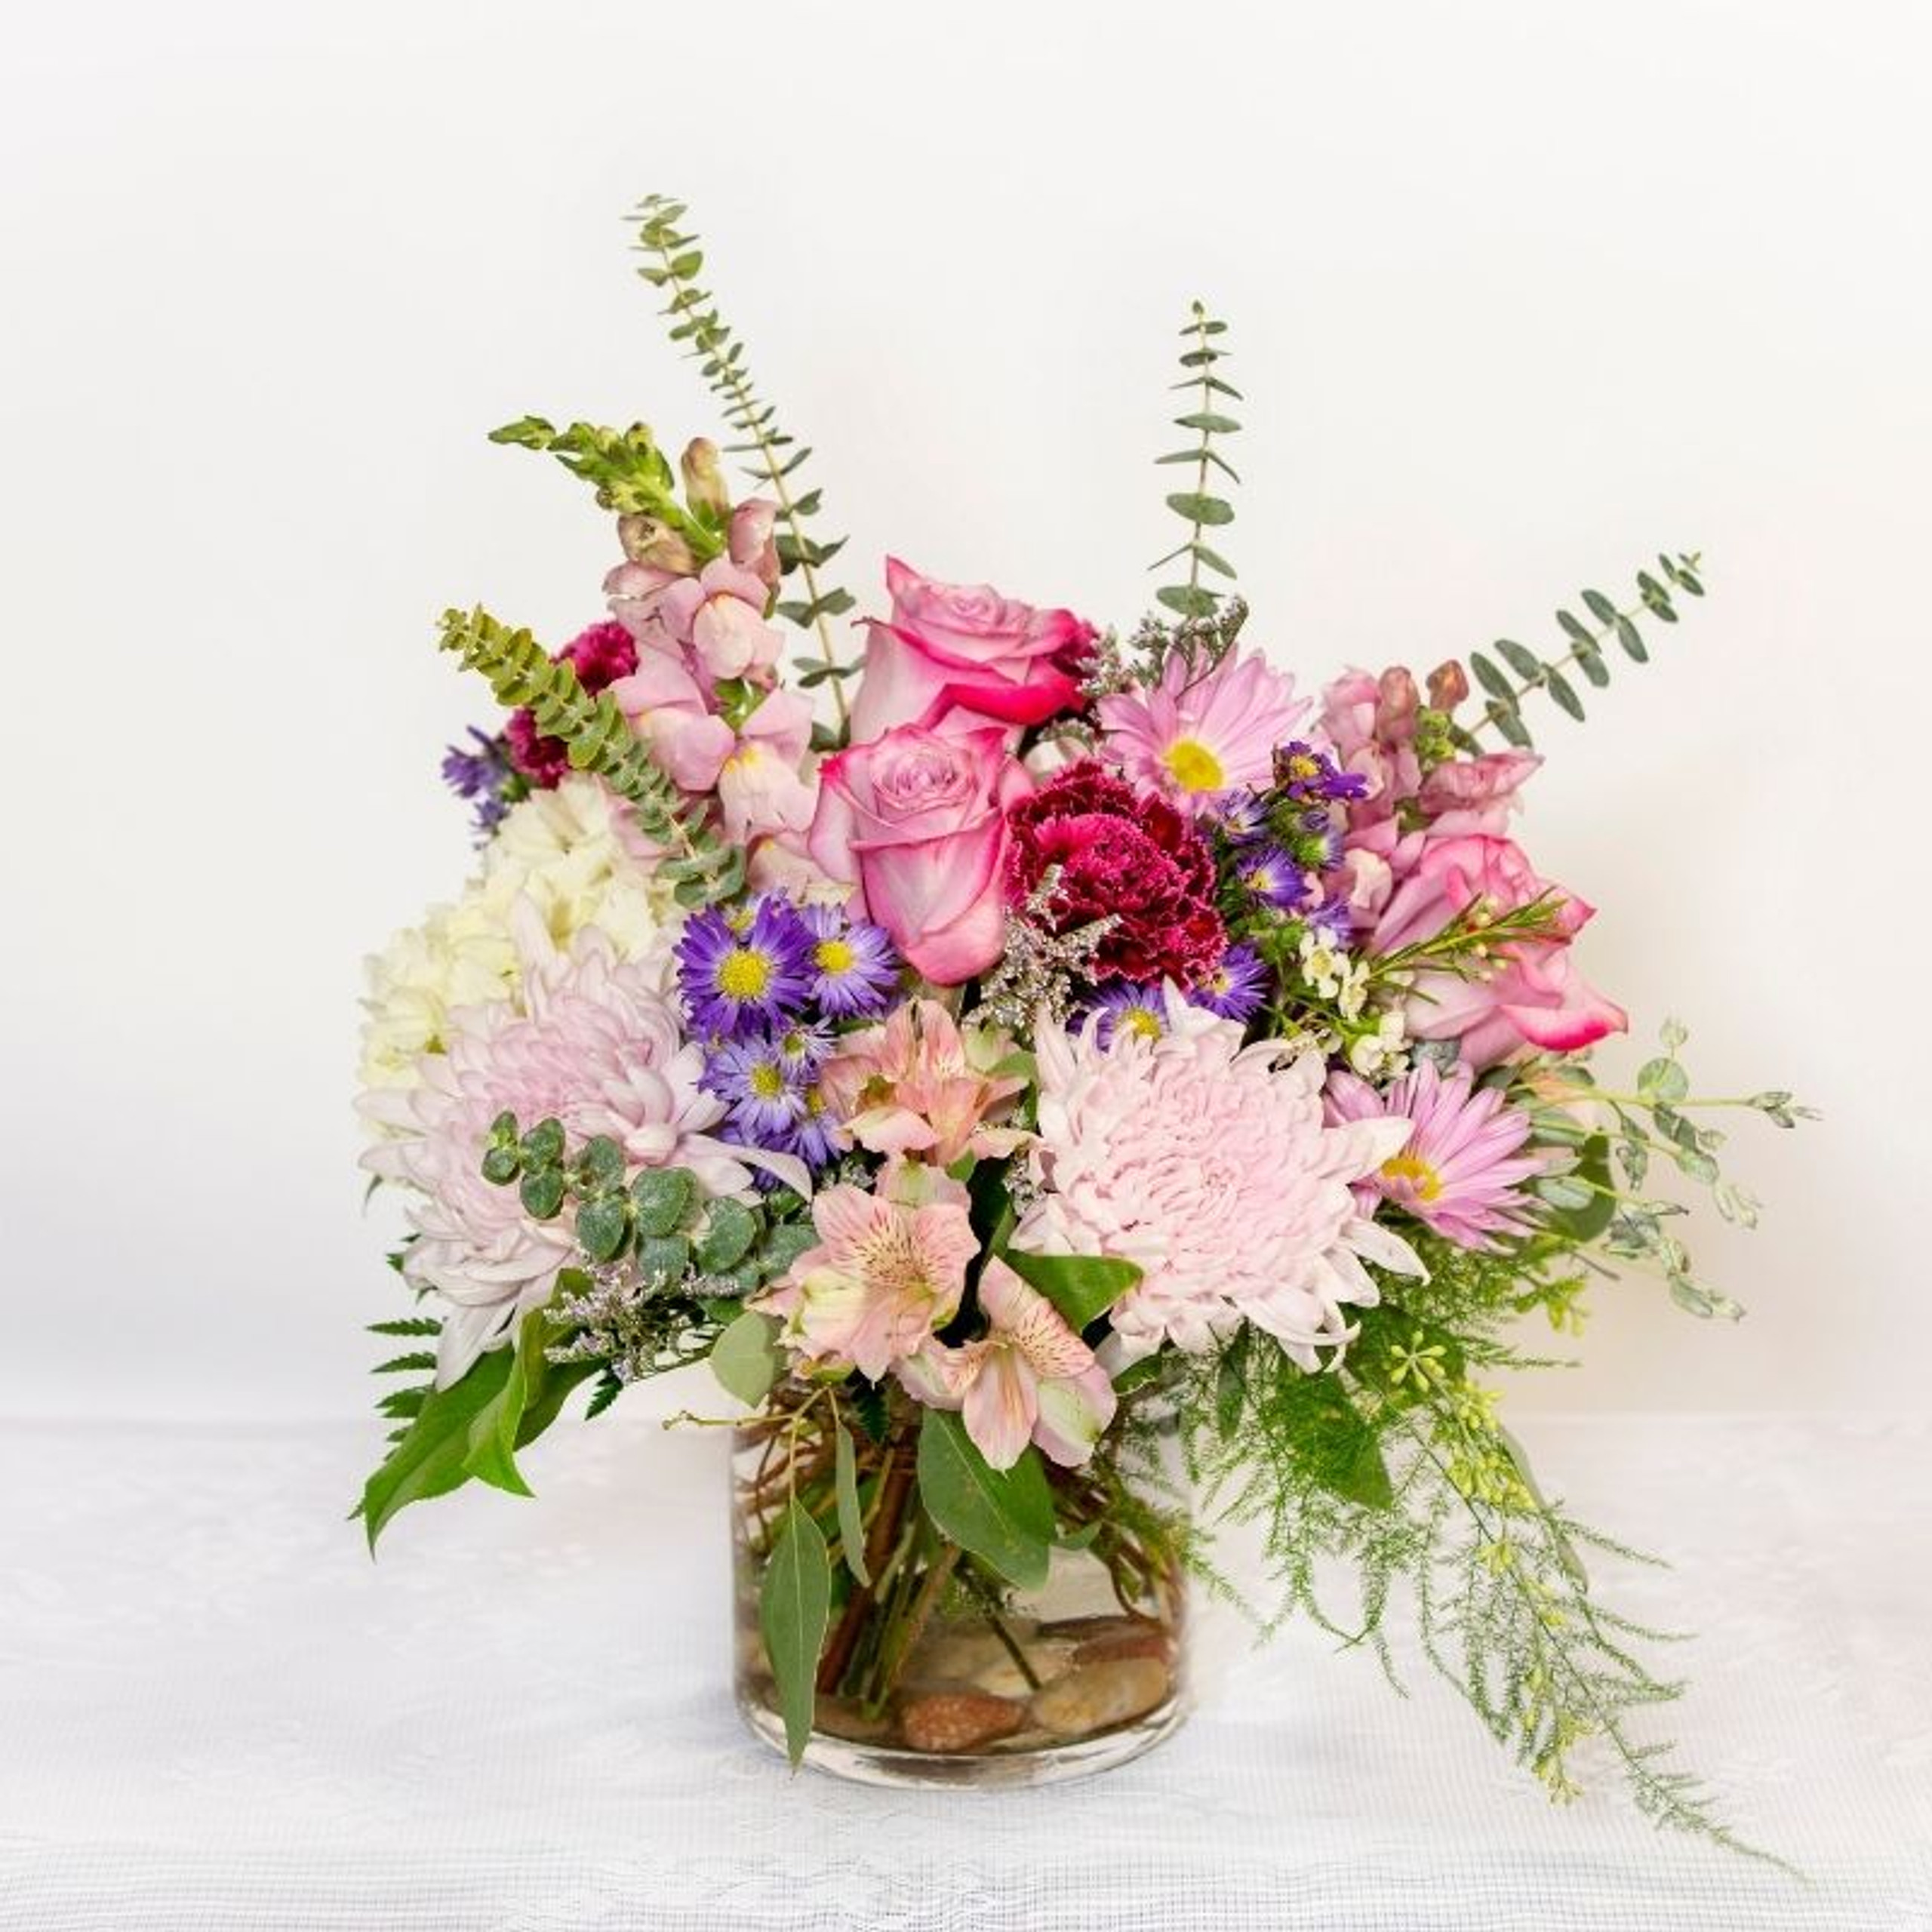 Williamsburg Florist - Flower Delivery by Morrison's Flowers & Gifts